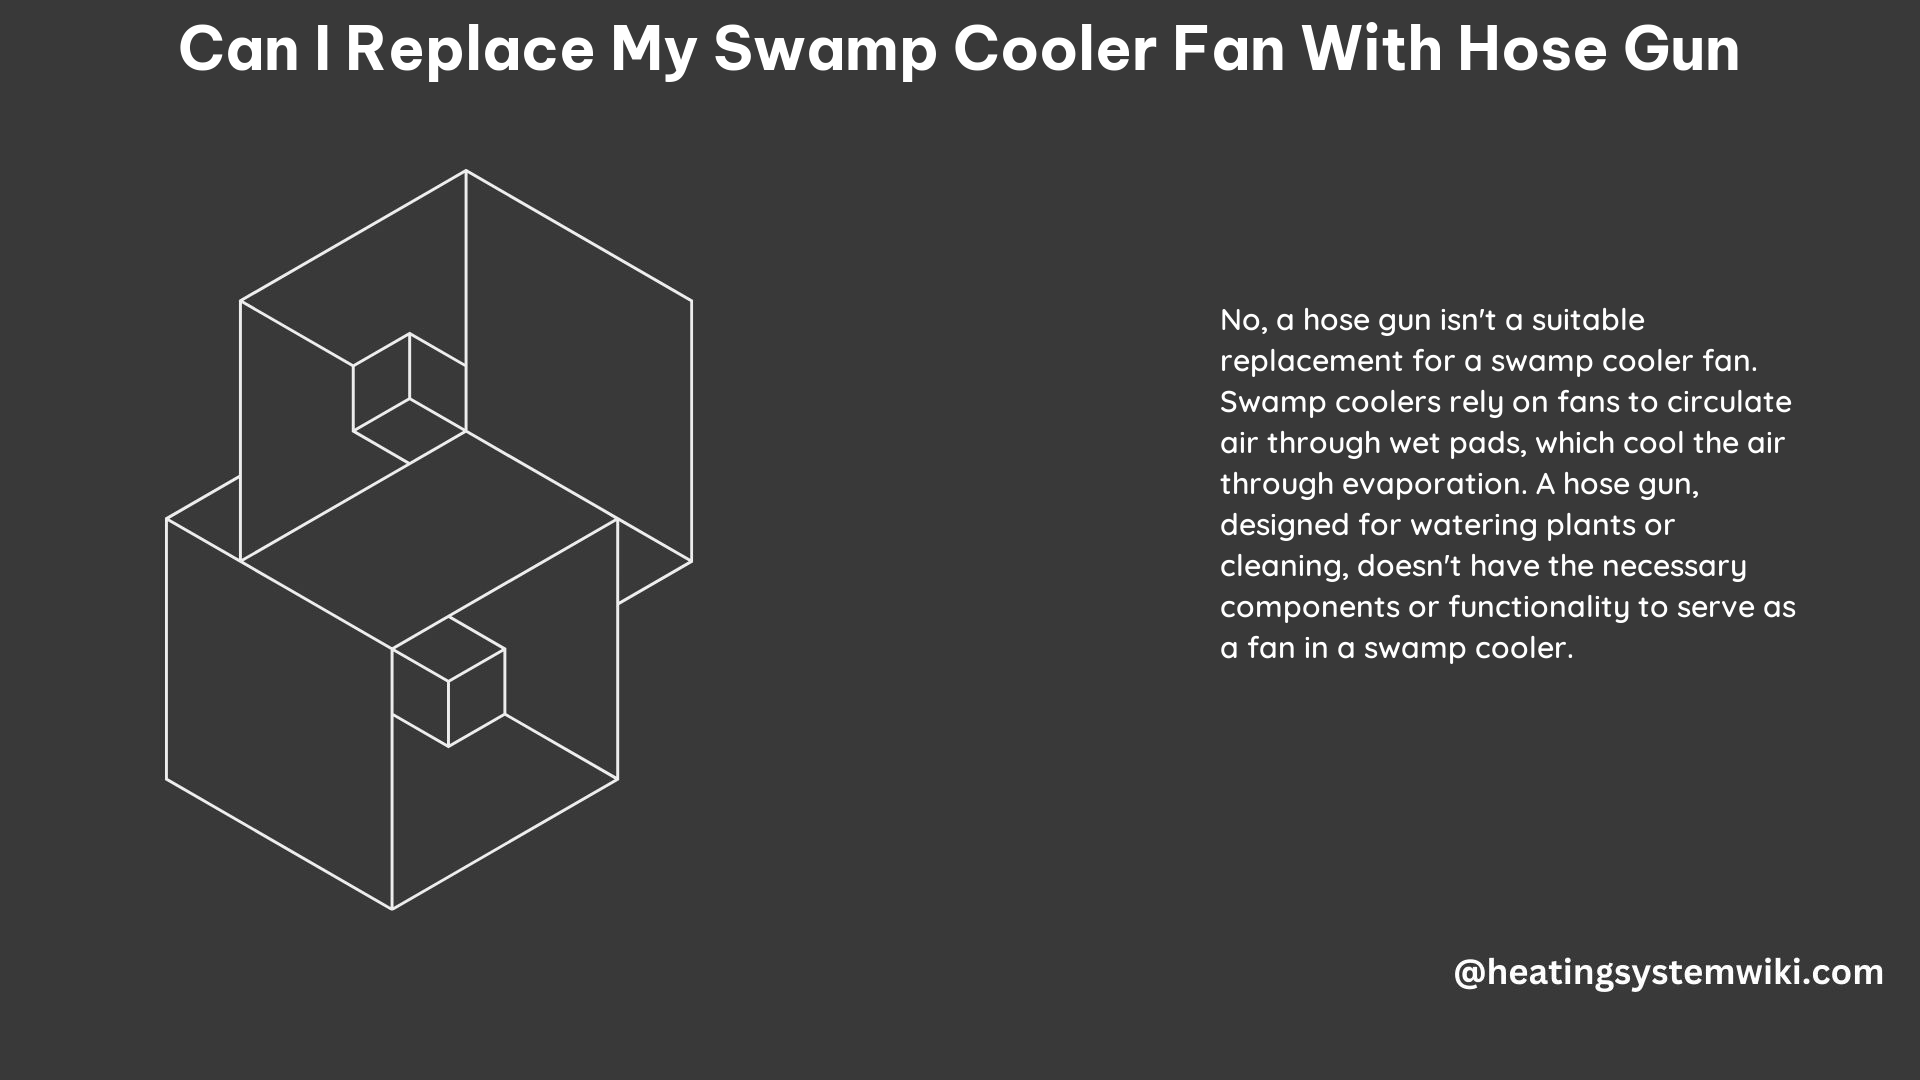 Can I Replace My Swamp Cooler Fan With Hose Gun